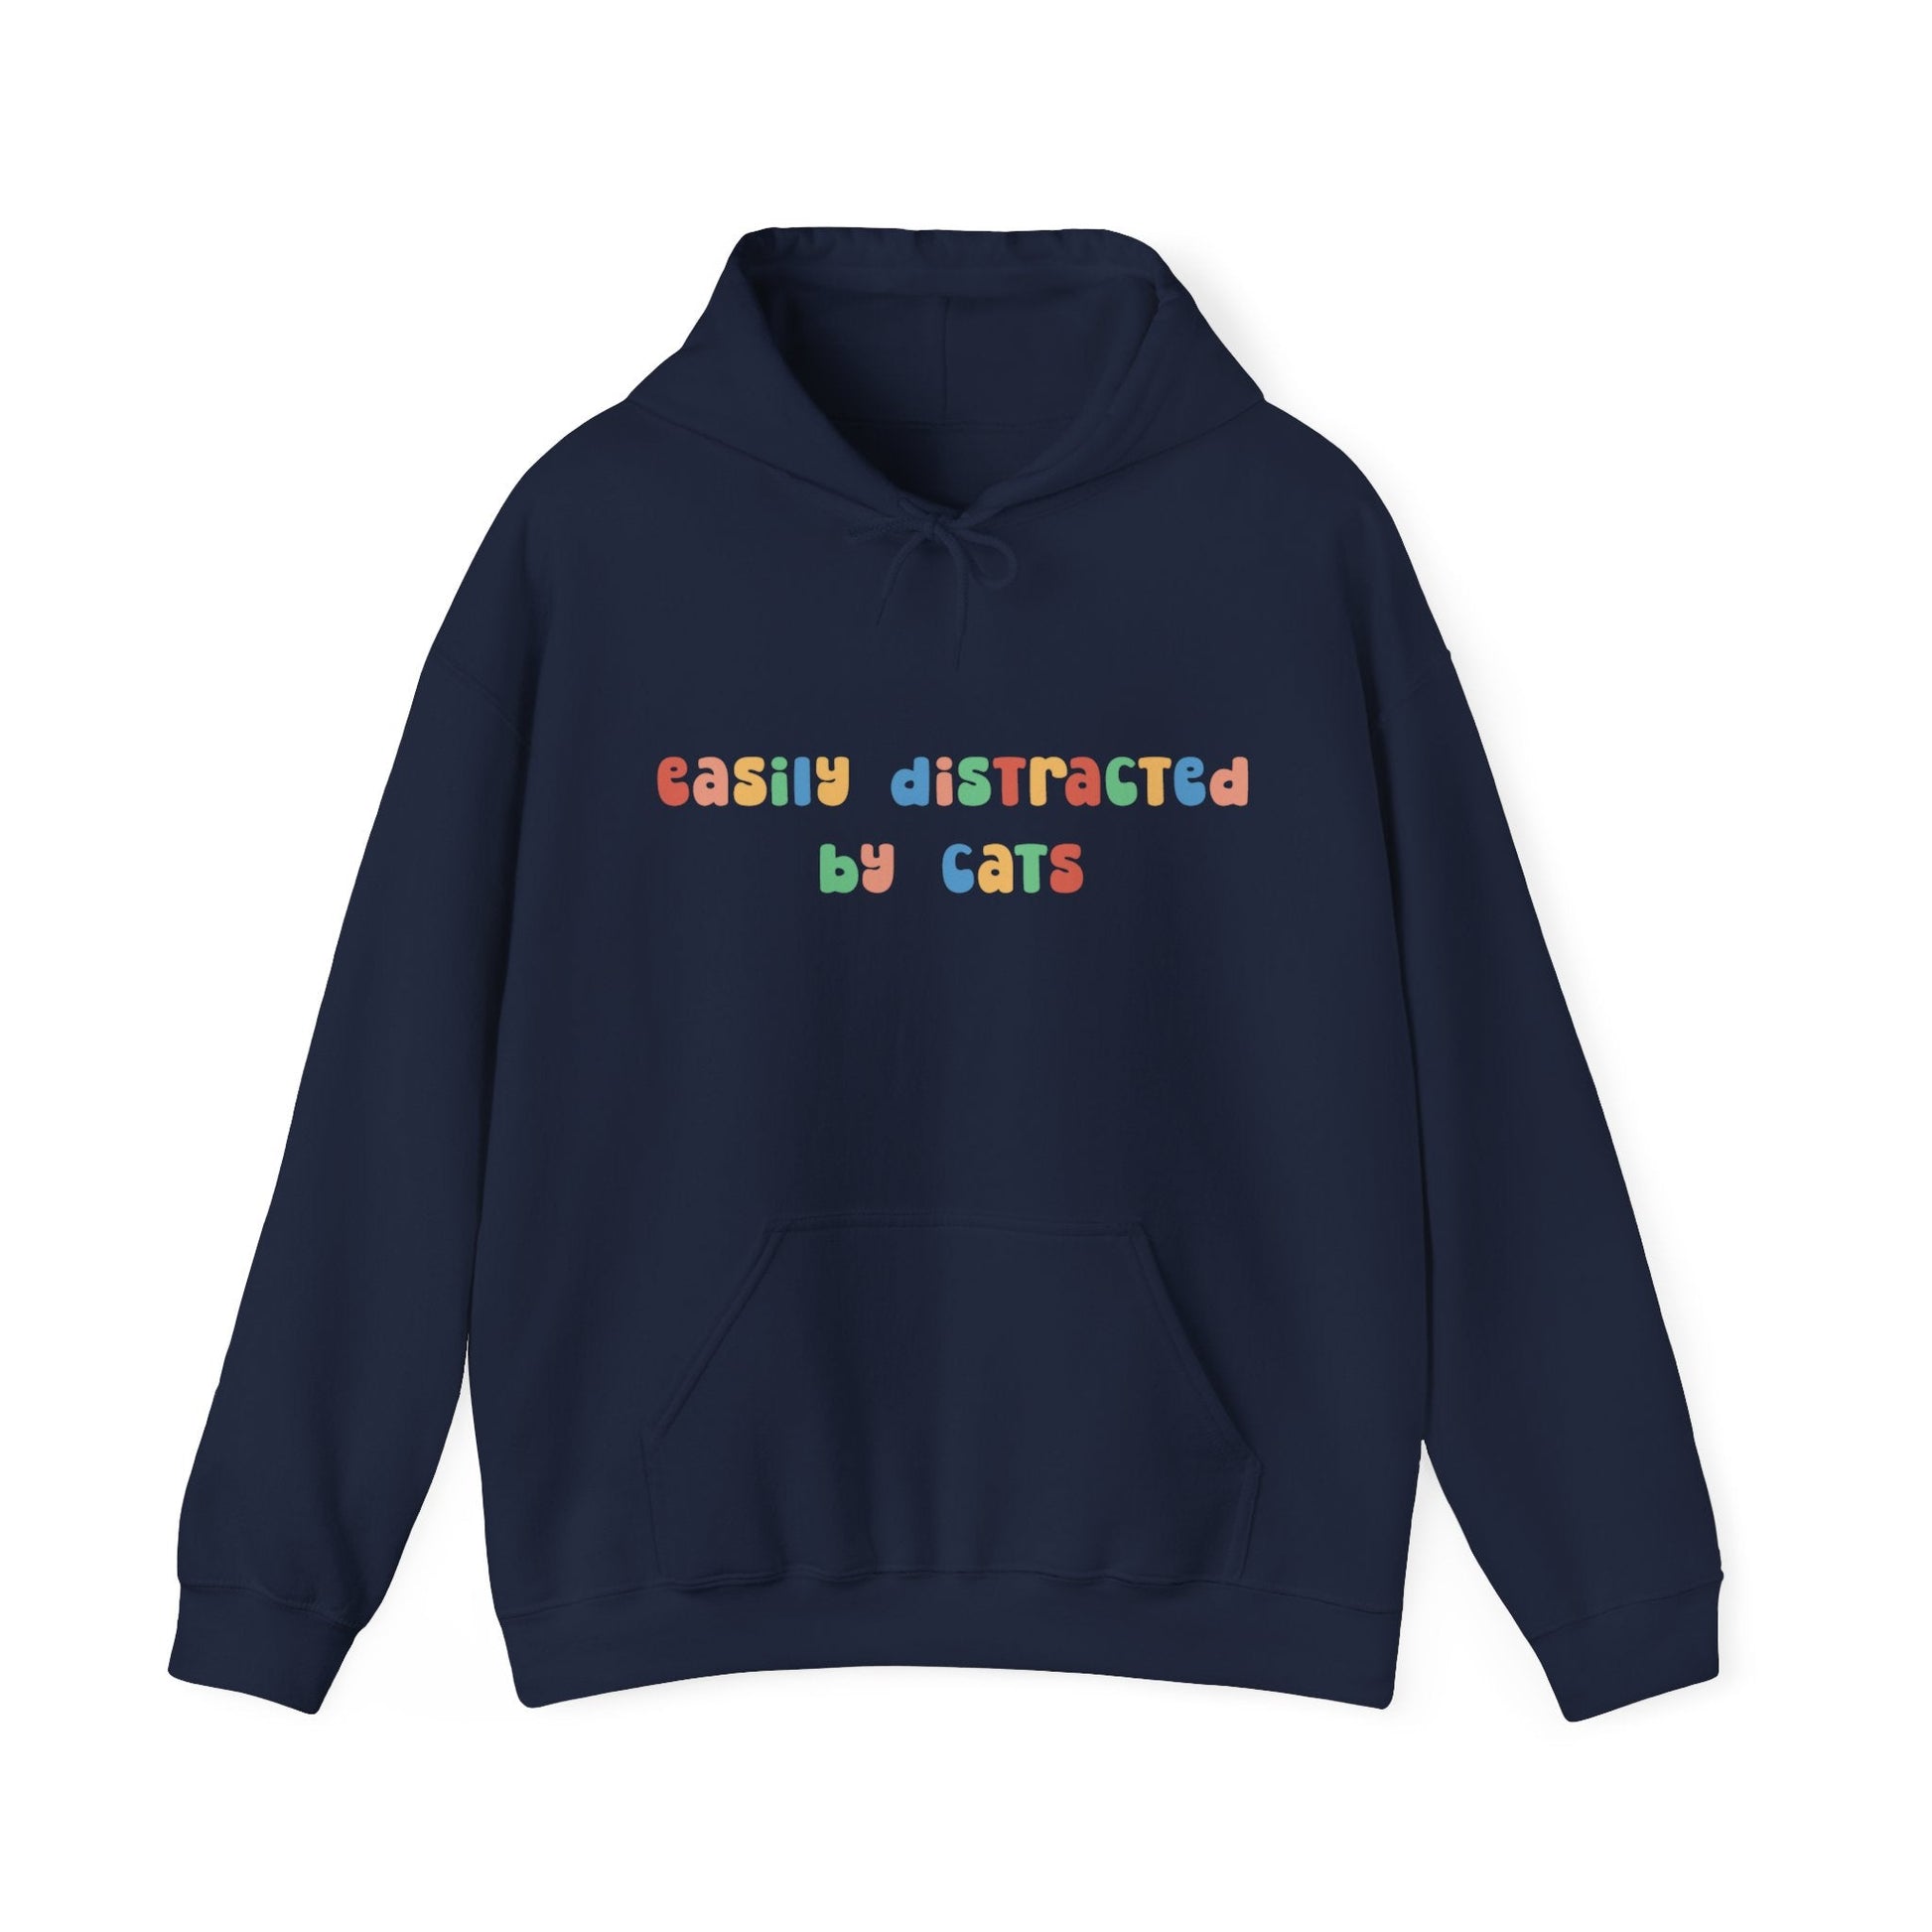 Easily Distracted by Cats | Hooded Sweatshirt - Detezi Designs-20180125828731417987